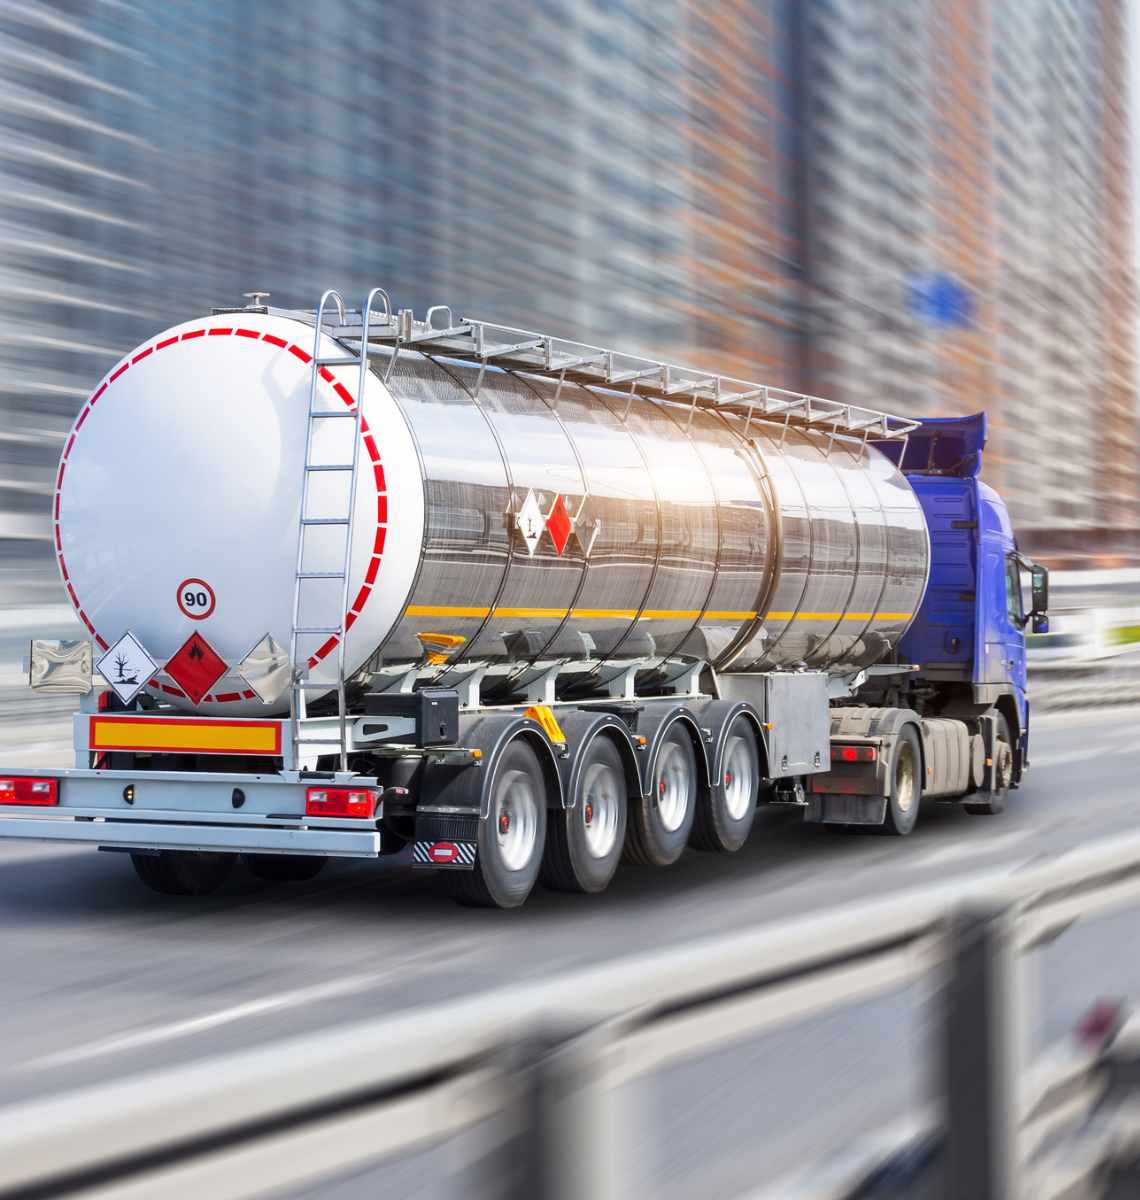 Large fuel truck on the road